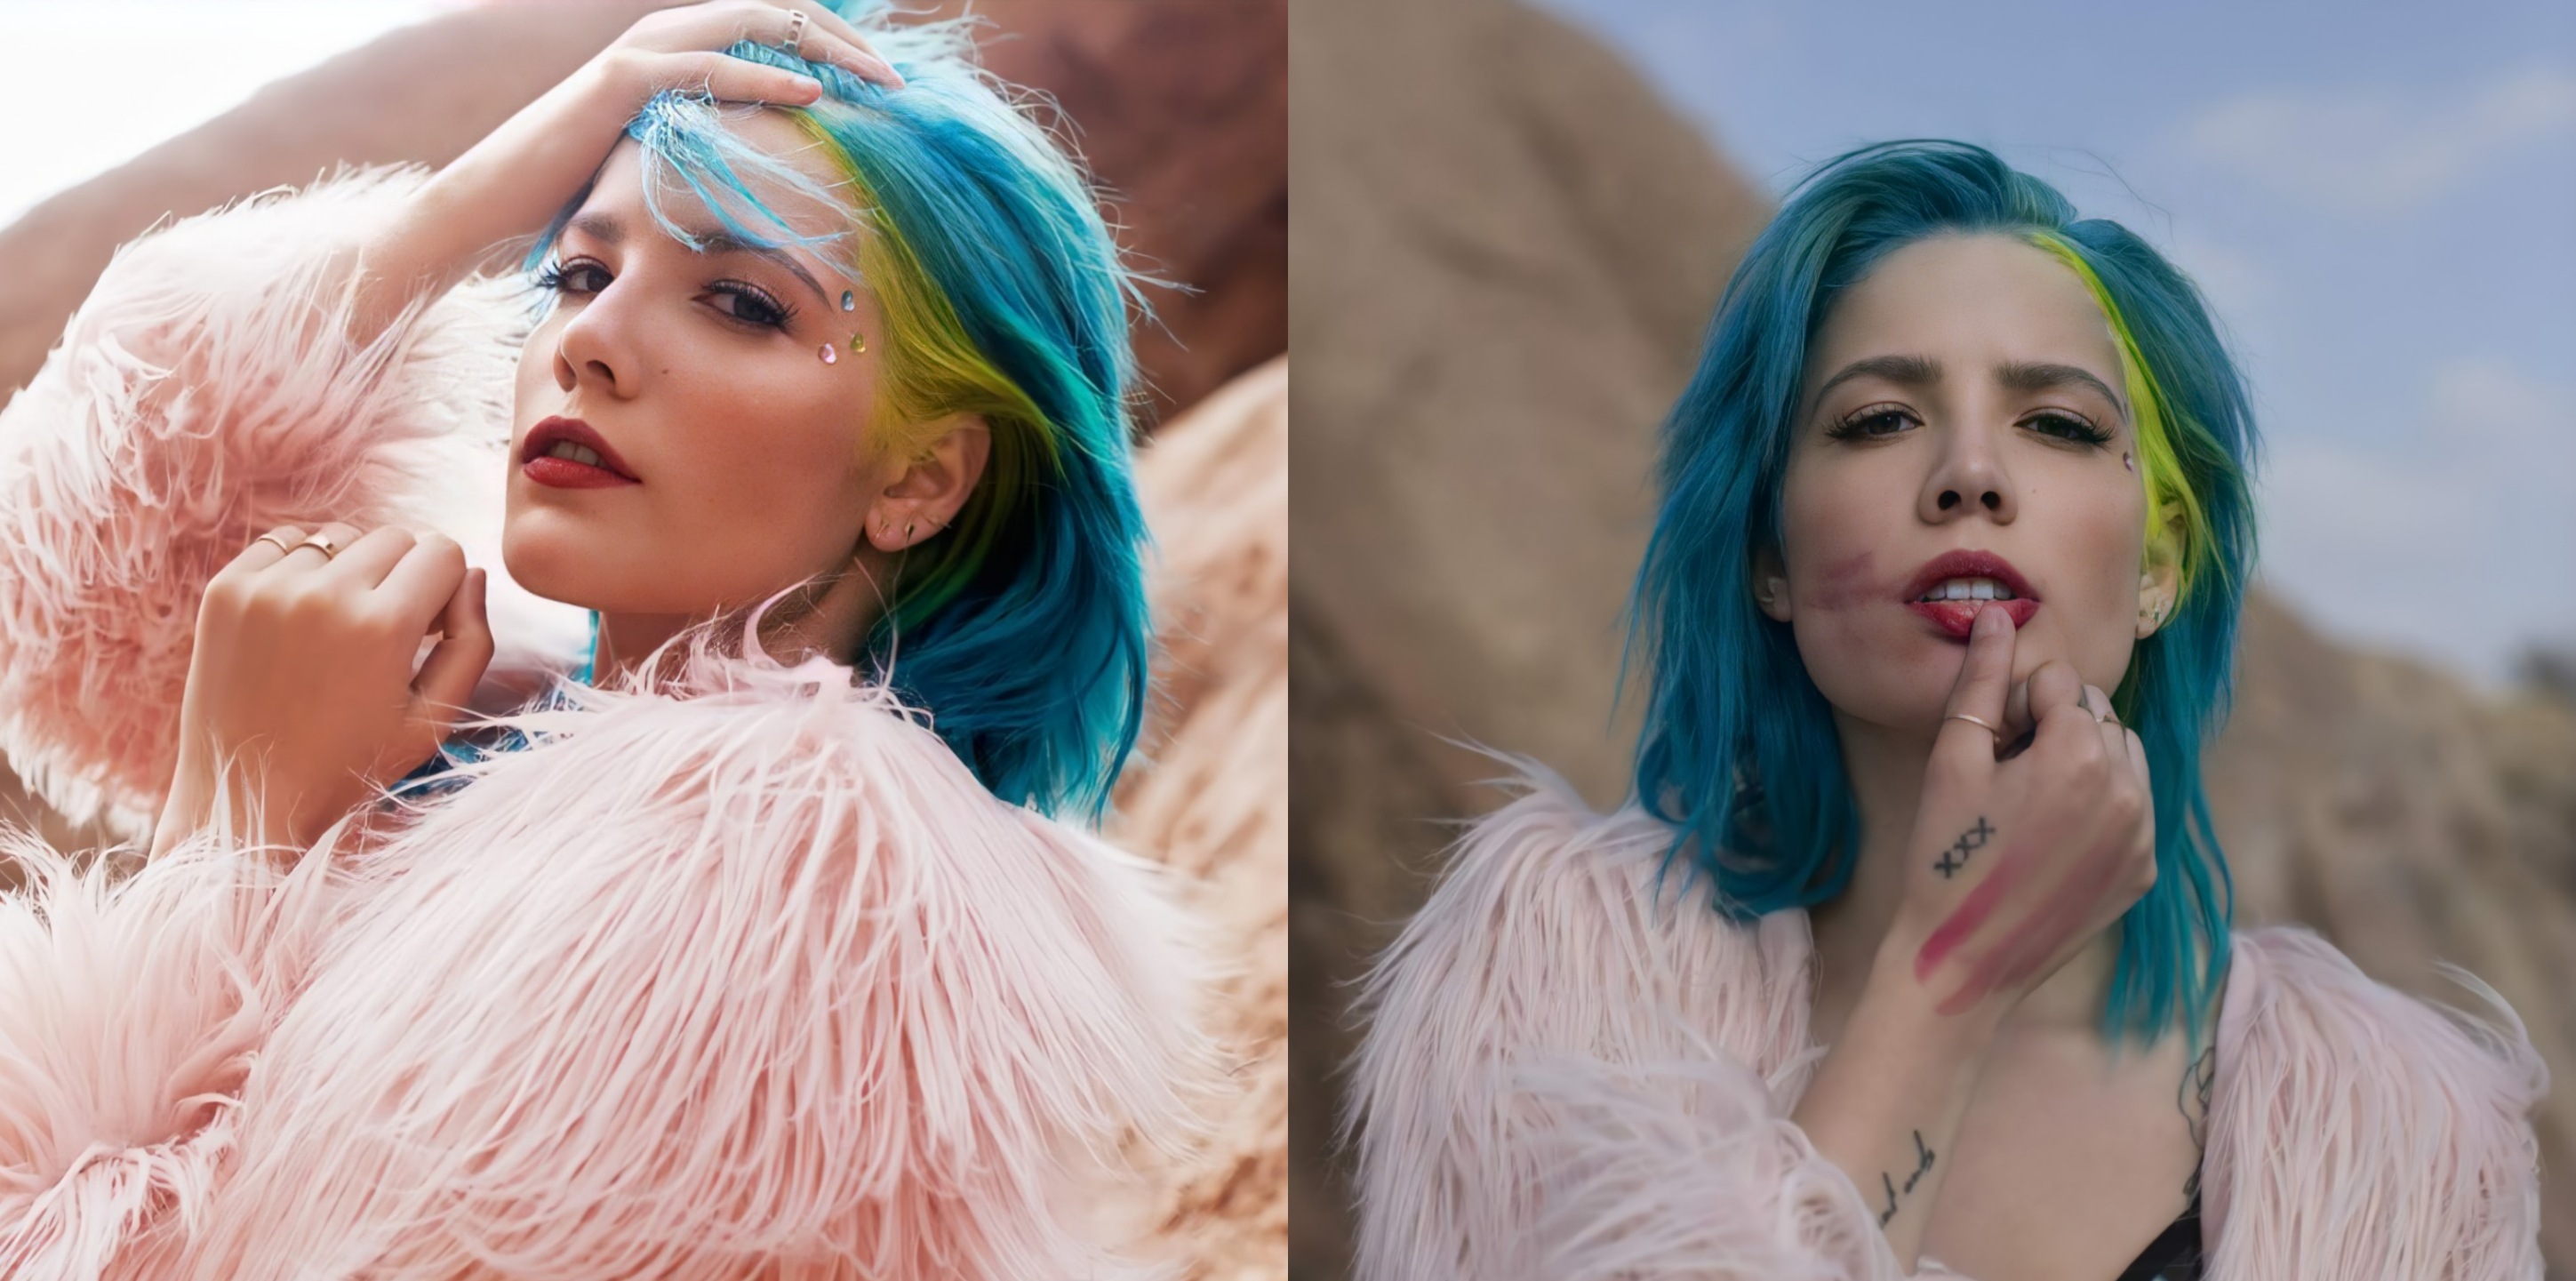 Halsey's Blue Hair: A Tribute to Her Badlands Era - wide 4